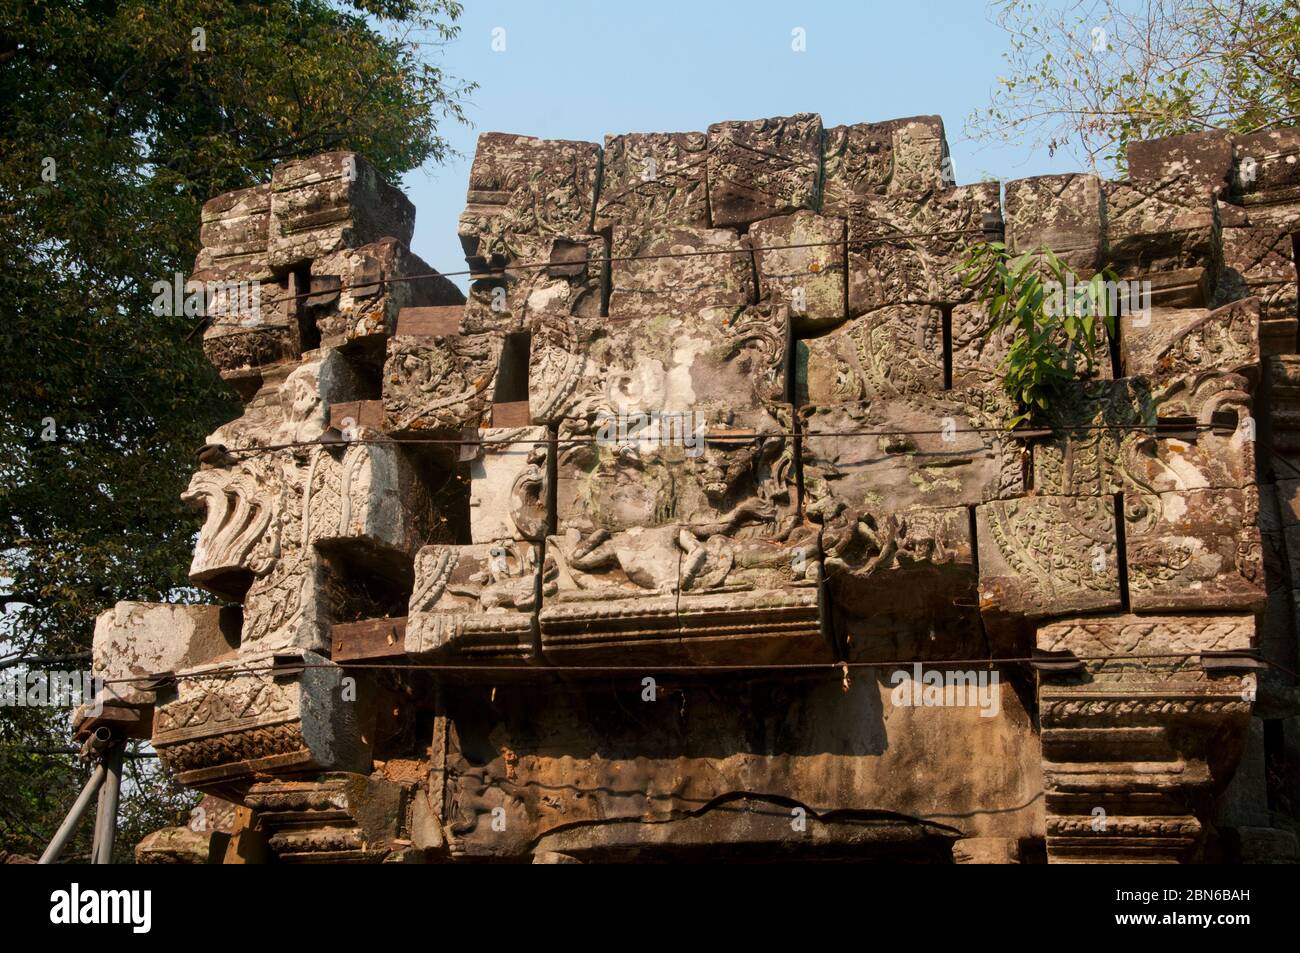 Cambodia: The West gopura (entrance) at the early 11th century hilltop Khmer temple, Chau Srei Vibol (also known as Wat Trak), near Angkor.  The unres Stock Photo